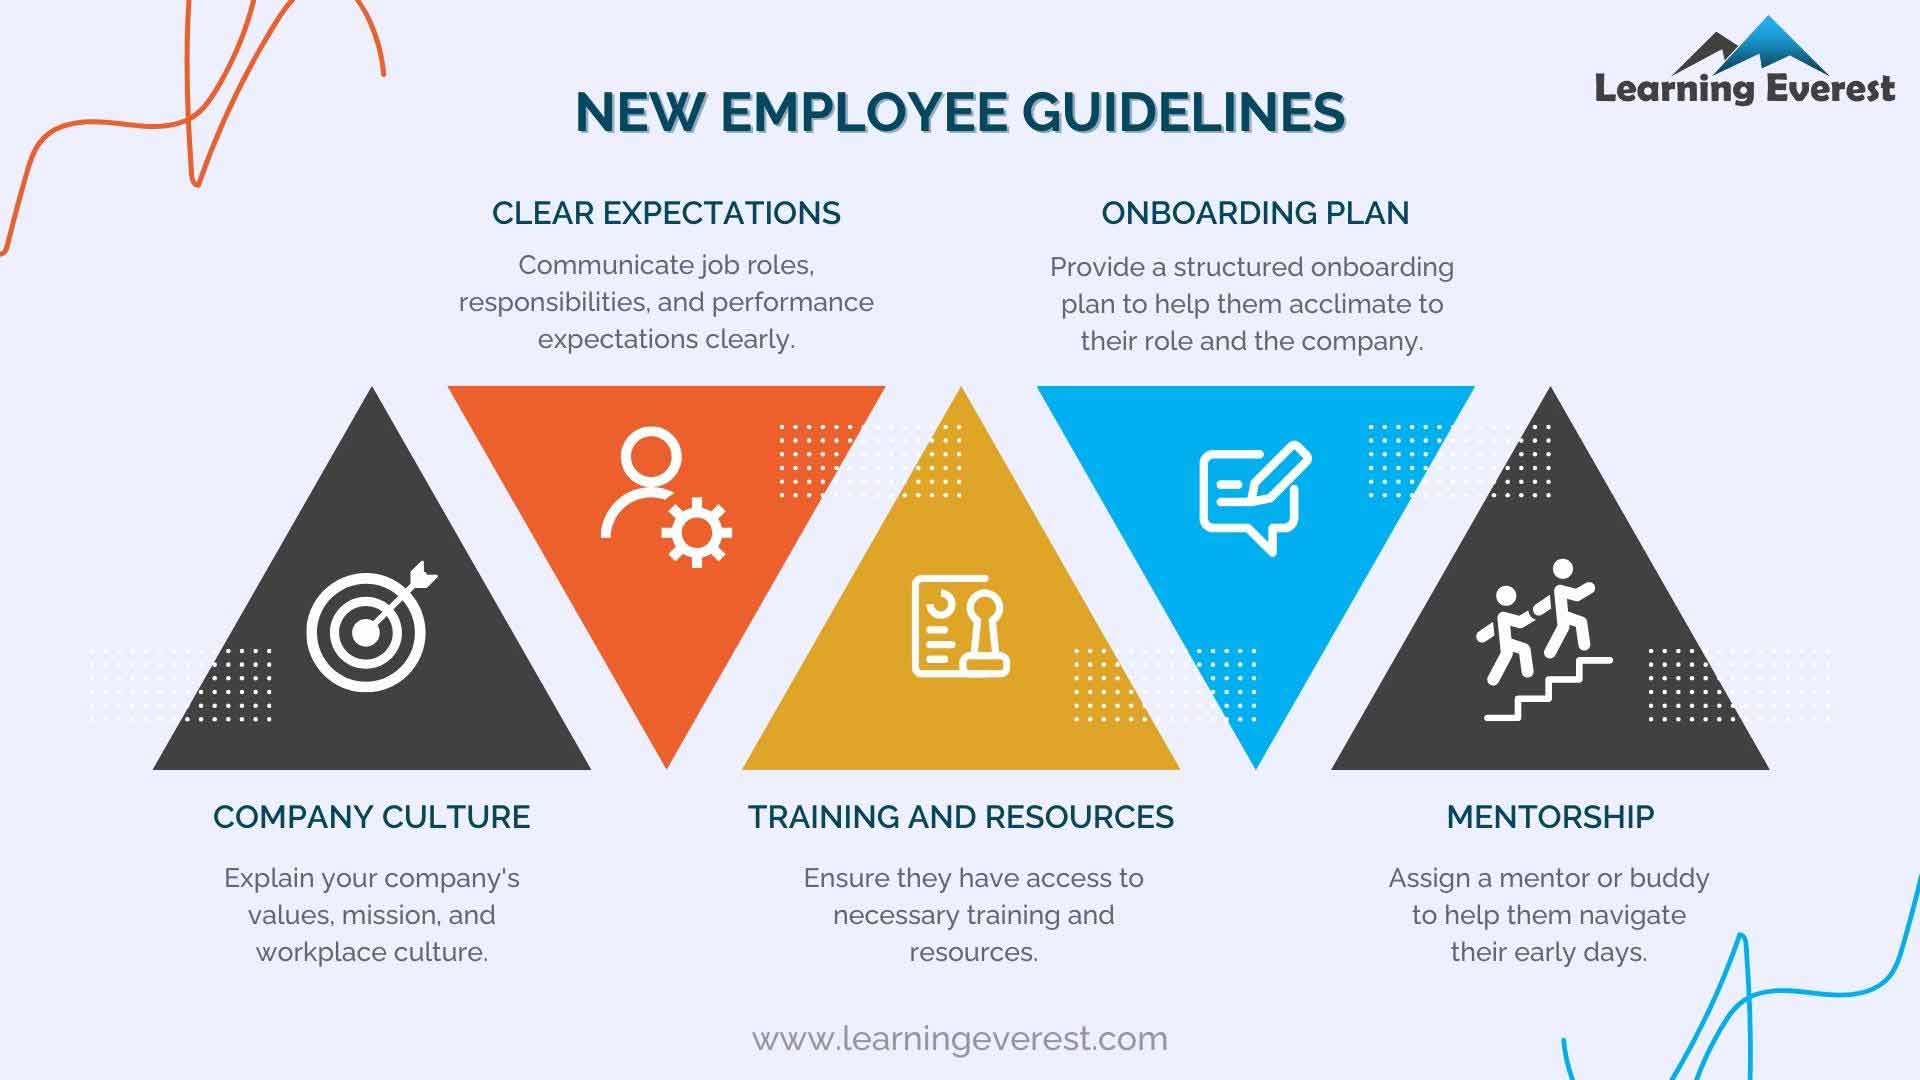 Phases of Employee Onboarding - Discovery